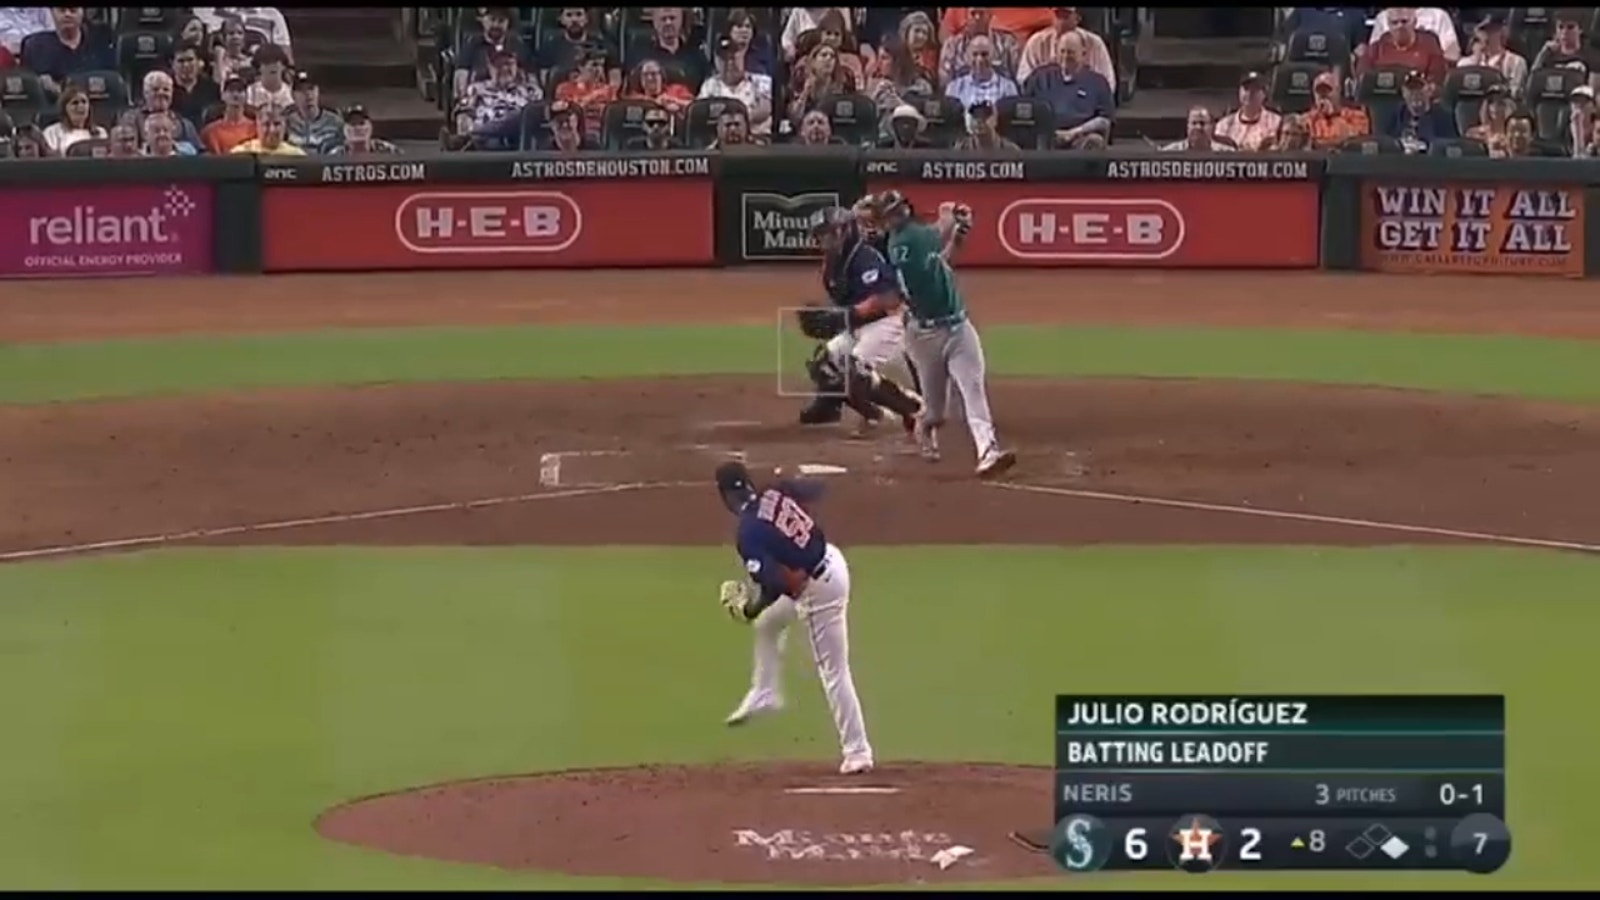 Mariners star Julio Rodriguez collects his 17th hit over his last four games to set a major-league record